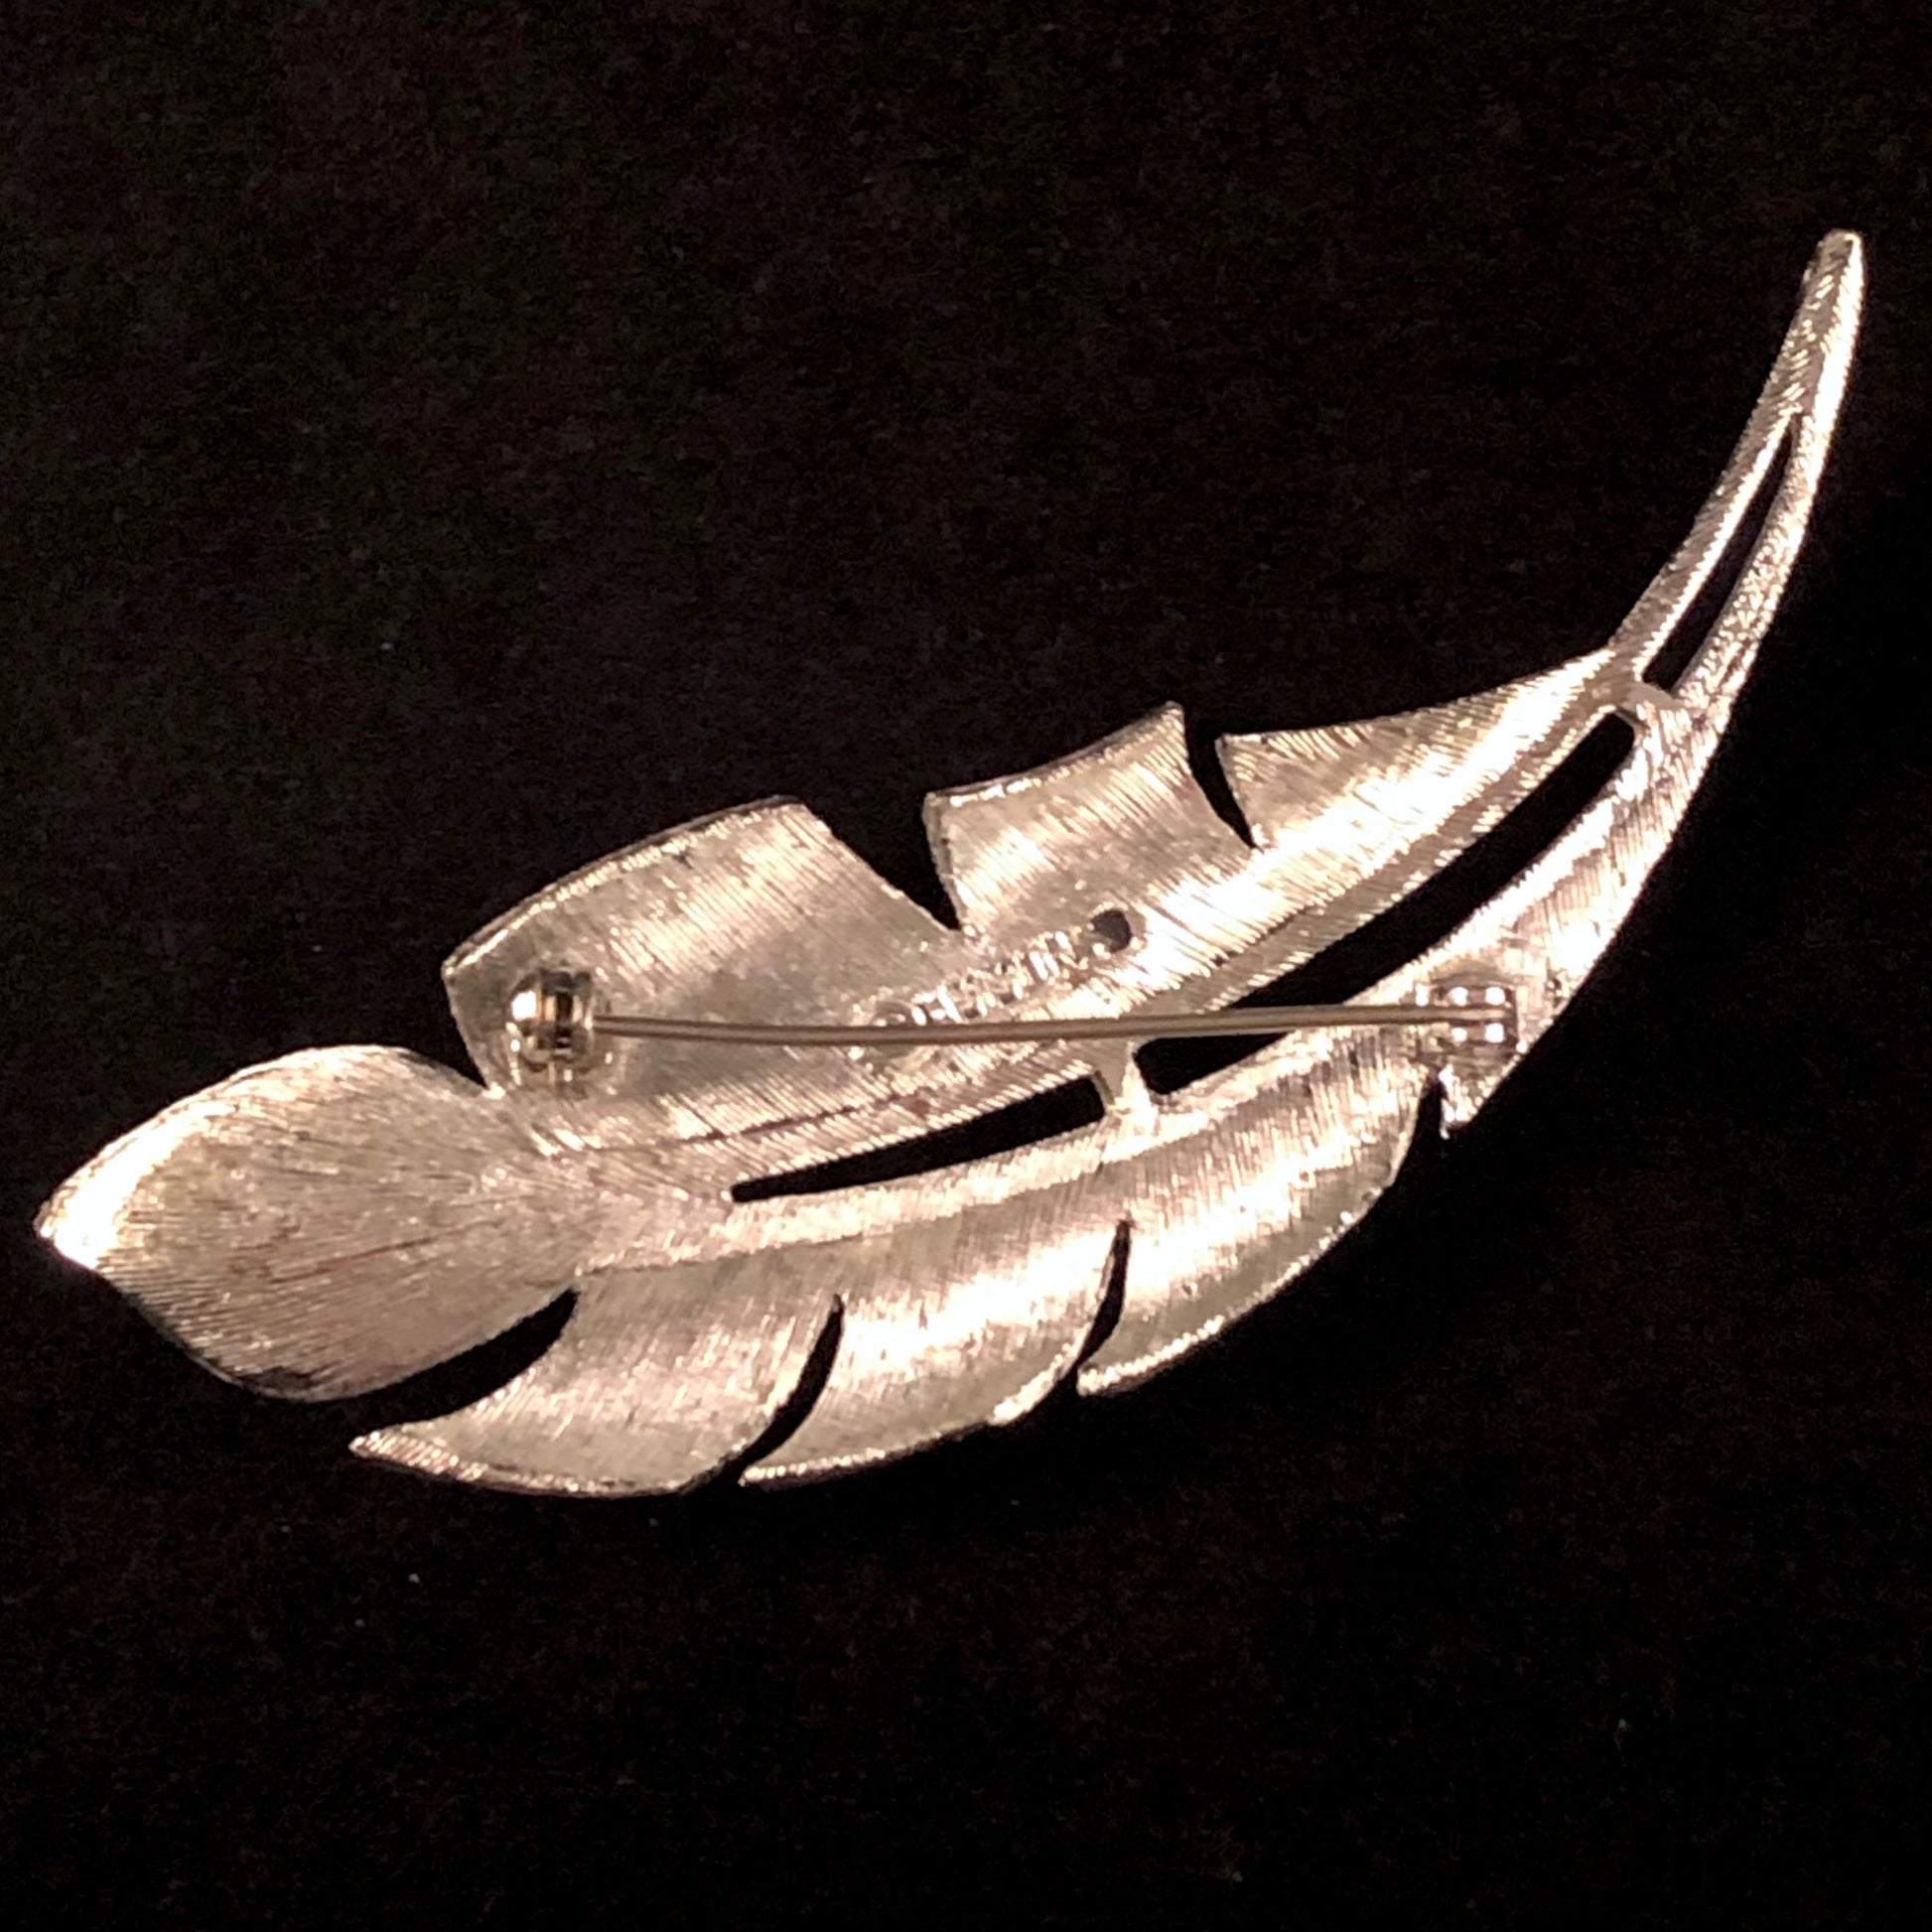 Early 1950s Emmons Leaf Brooch - Retro Kandy Vintage